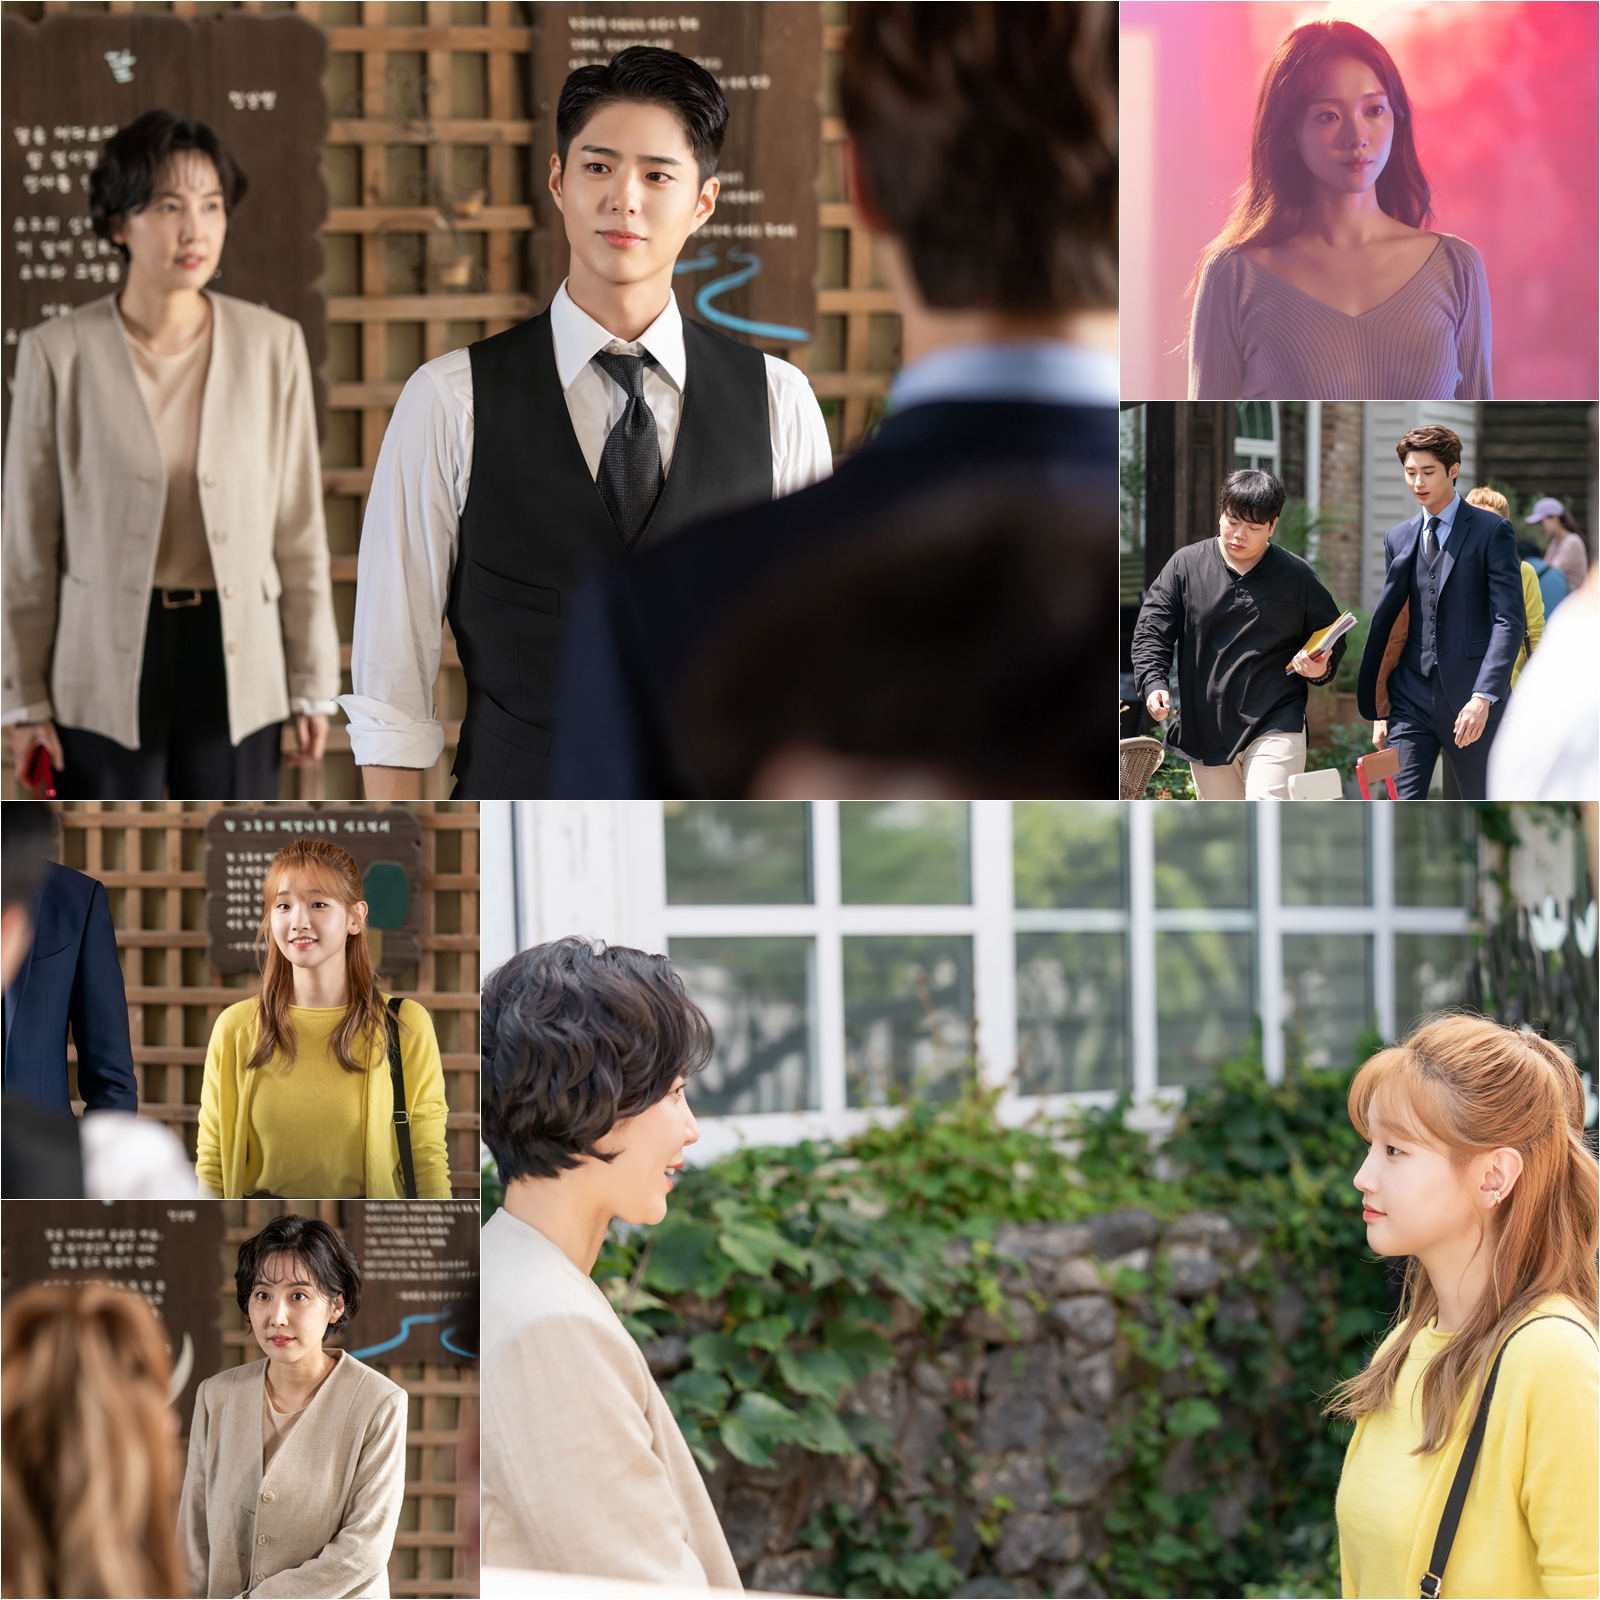 Actor Lee Sung-kyung makes a special appearance on Record of YouthTVNs monthly drama Record of Youth (playplayed by Ha Myung-hee and directed by Ahn Gil-ho) released a still cut on the 13th that shows Sa Hye-joon (played by Park Bo-gum), who is also strong in Danger.The photo shows An Jeong-ha (Park So-dam), Sa Hye-joon, and Won Hae-hyo (Byeon Woo-suk), who are busy sharing their eyes with peoples eyes on the set.Here, Lee Sung-kyung, who is a colleague of Sa Hye-joons model and a special appearance as the main character of the new work, Jin Seo-woo, is also caught and raises expectations.Among them, Sa Hye-joon, who appeared in a new work without shaking even in Danger, was caught. Sa Hye-joon, who emits Actors aura, catches the eye.In addition, the melodrama of Sa Hye-joon, who is exchanging sweet eyes with Park So-dam, avoids the eyes of the field staff, is exciting.The serious face of manager Lee Min-jae (Shin Dong-mi), who summoned An Jeong-ha, is also exciting.Lee Min-jae, who watched the love of Sa Hye-joon and Ahn Jung-ha, is curious about why he came to his own place and what he would have said to Ahn Jung-ha.Also interesting is Danger, a dreamy man of Jin Seo-woo, a close friend and first human hero since he was a model with Sa Hye-joon.Lee Sung-kyung, who is a special actress, wonders what kind of performance he will play.iMBC  Photo Provision tvN